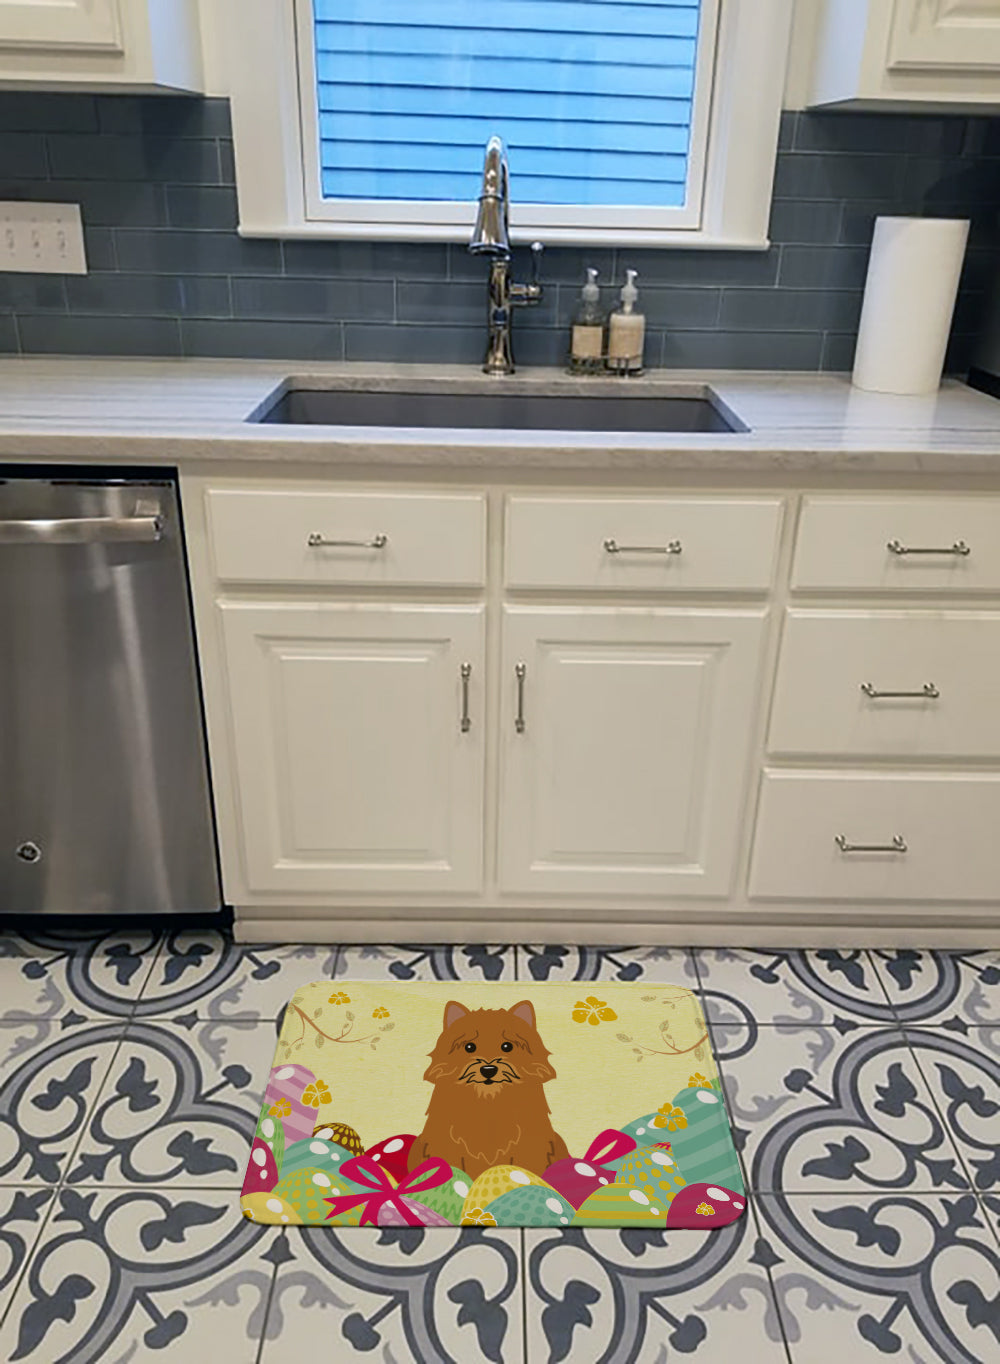 Easter Eggs Norwich Terrier Machine Washable Memory Foam Mat BB6020RUG - the-store.com